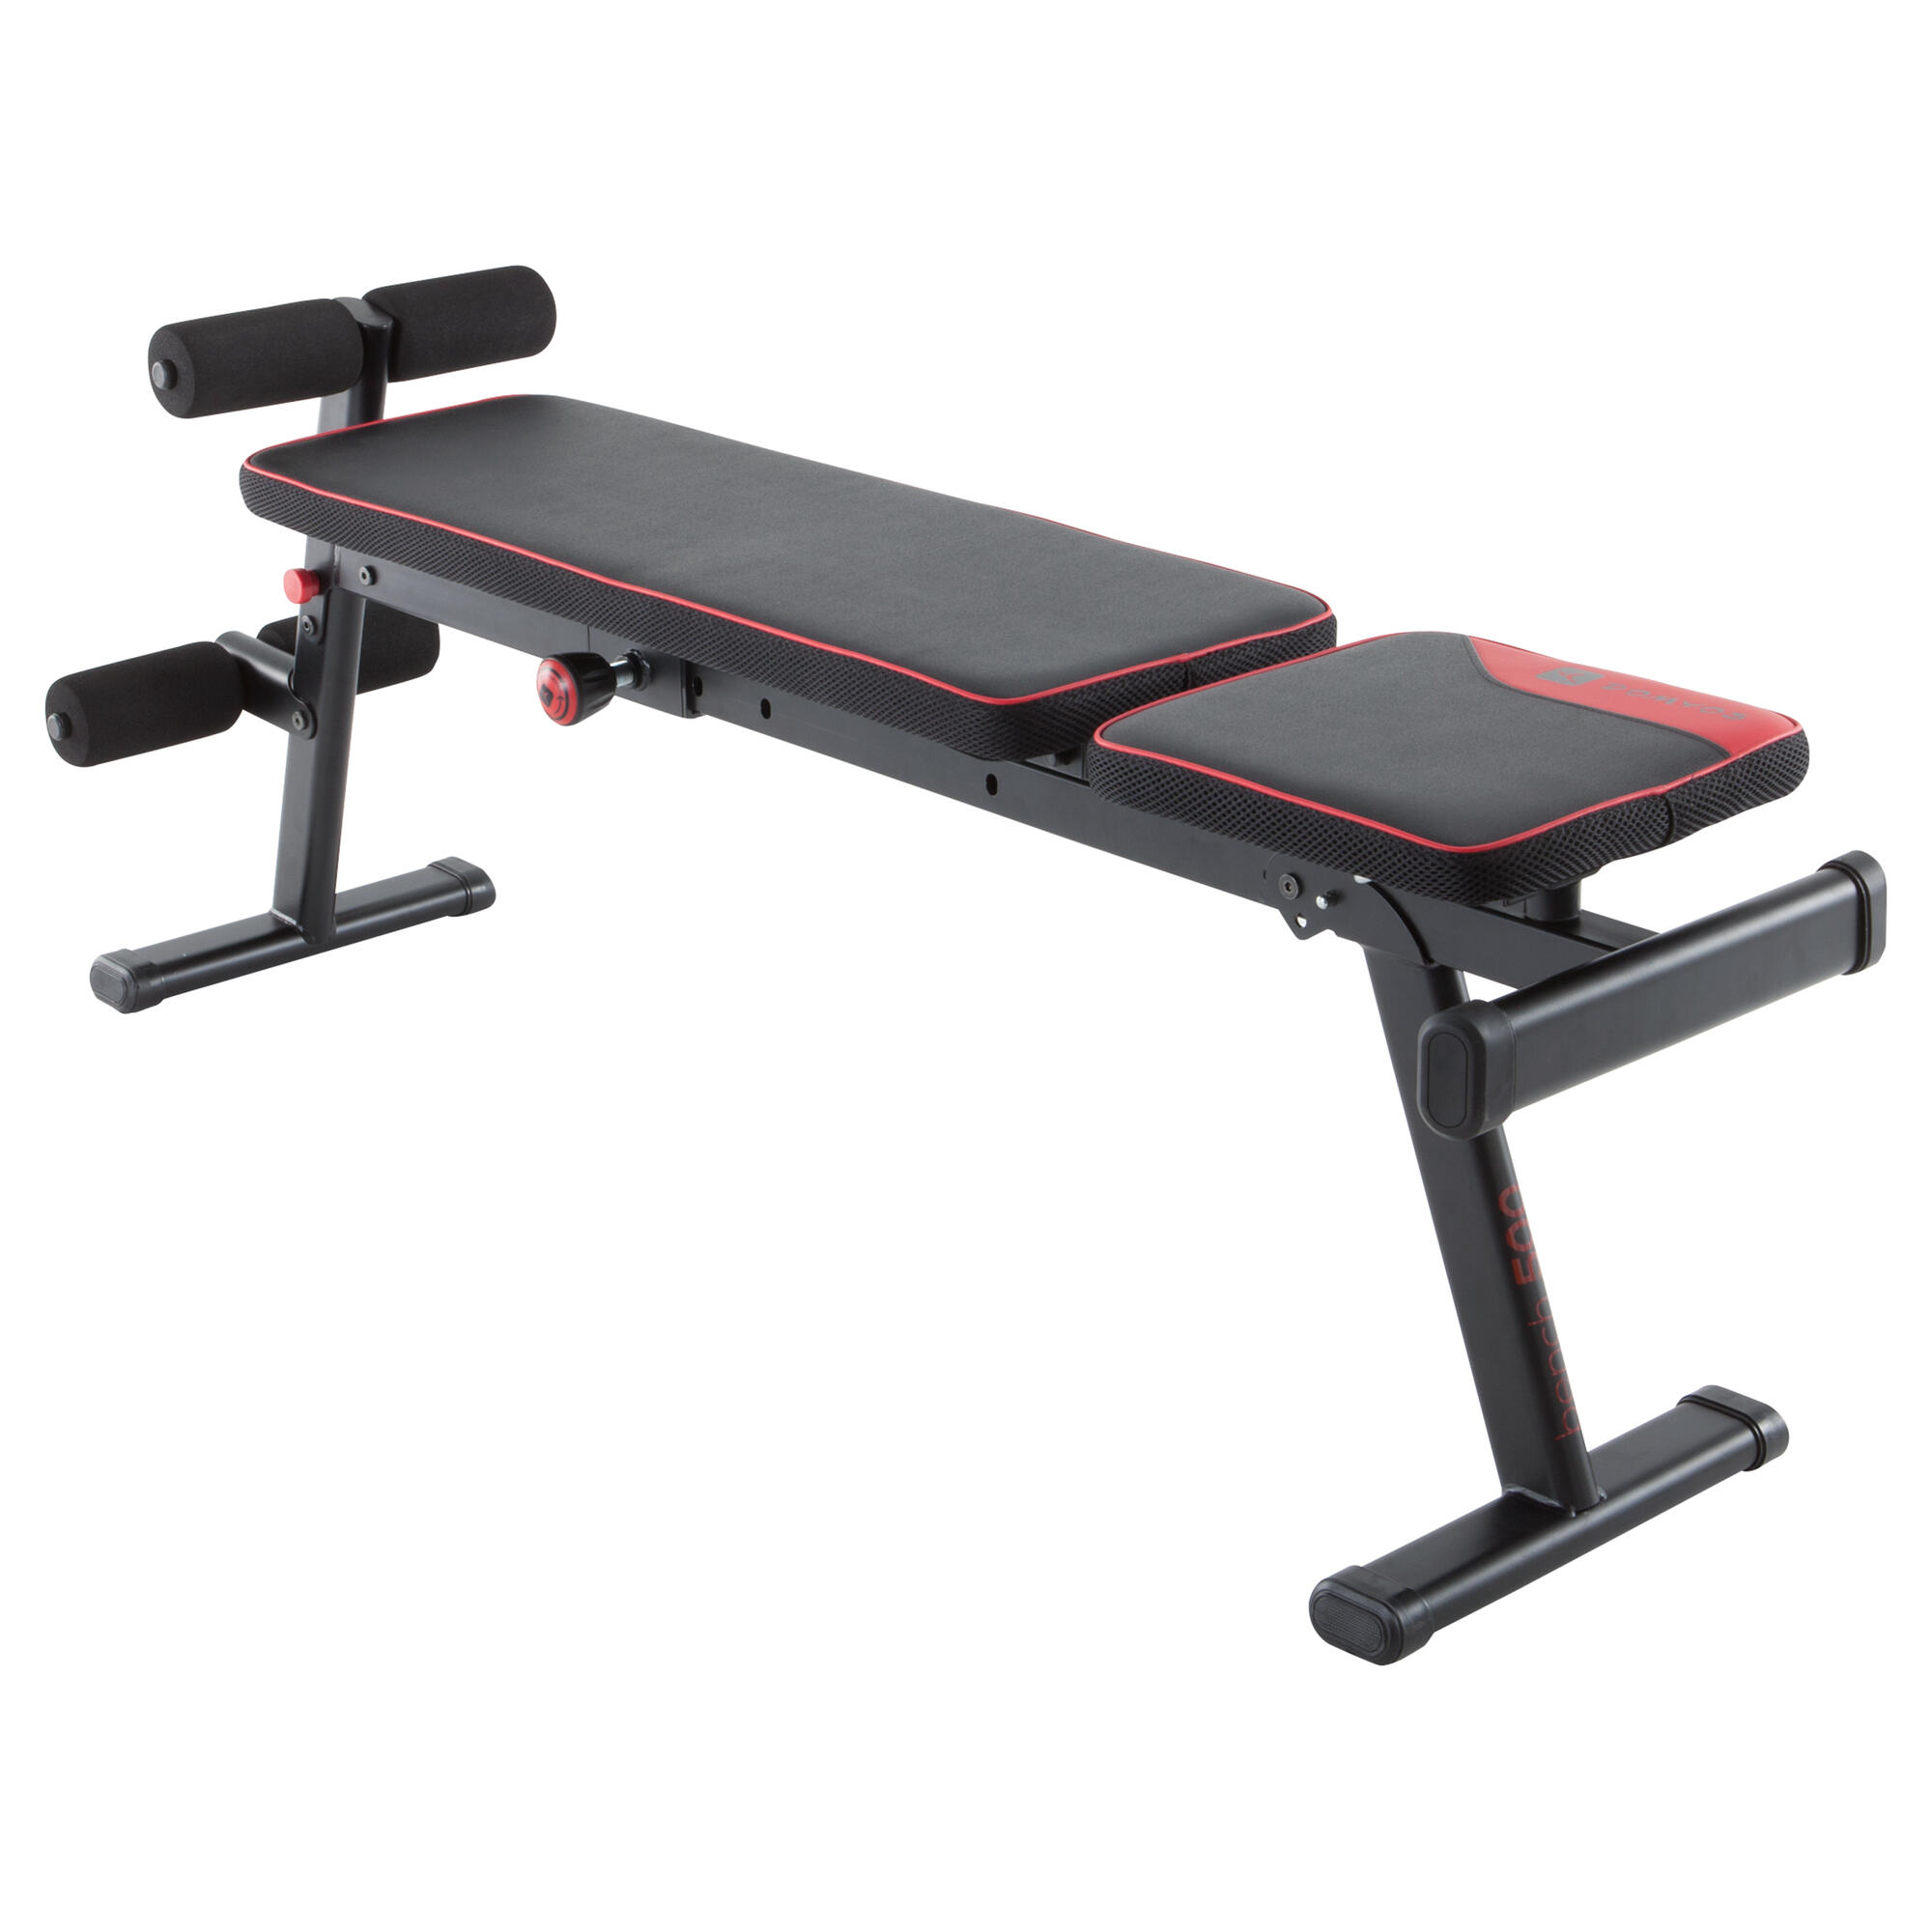 500 Fold-Down / Incline Weight Bench | Domyos by Decathlon